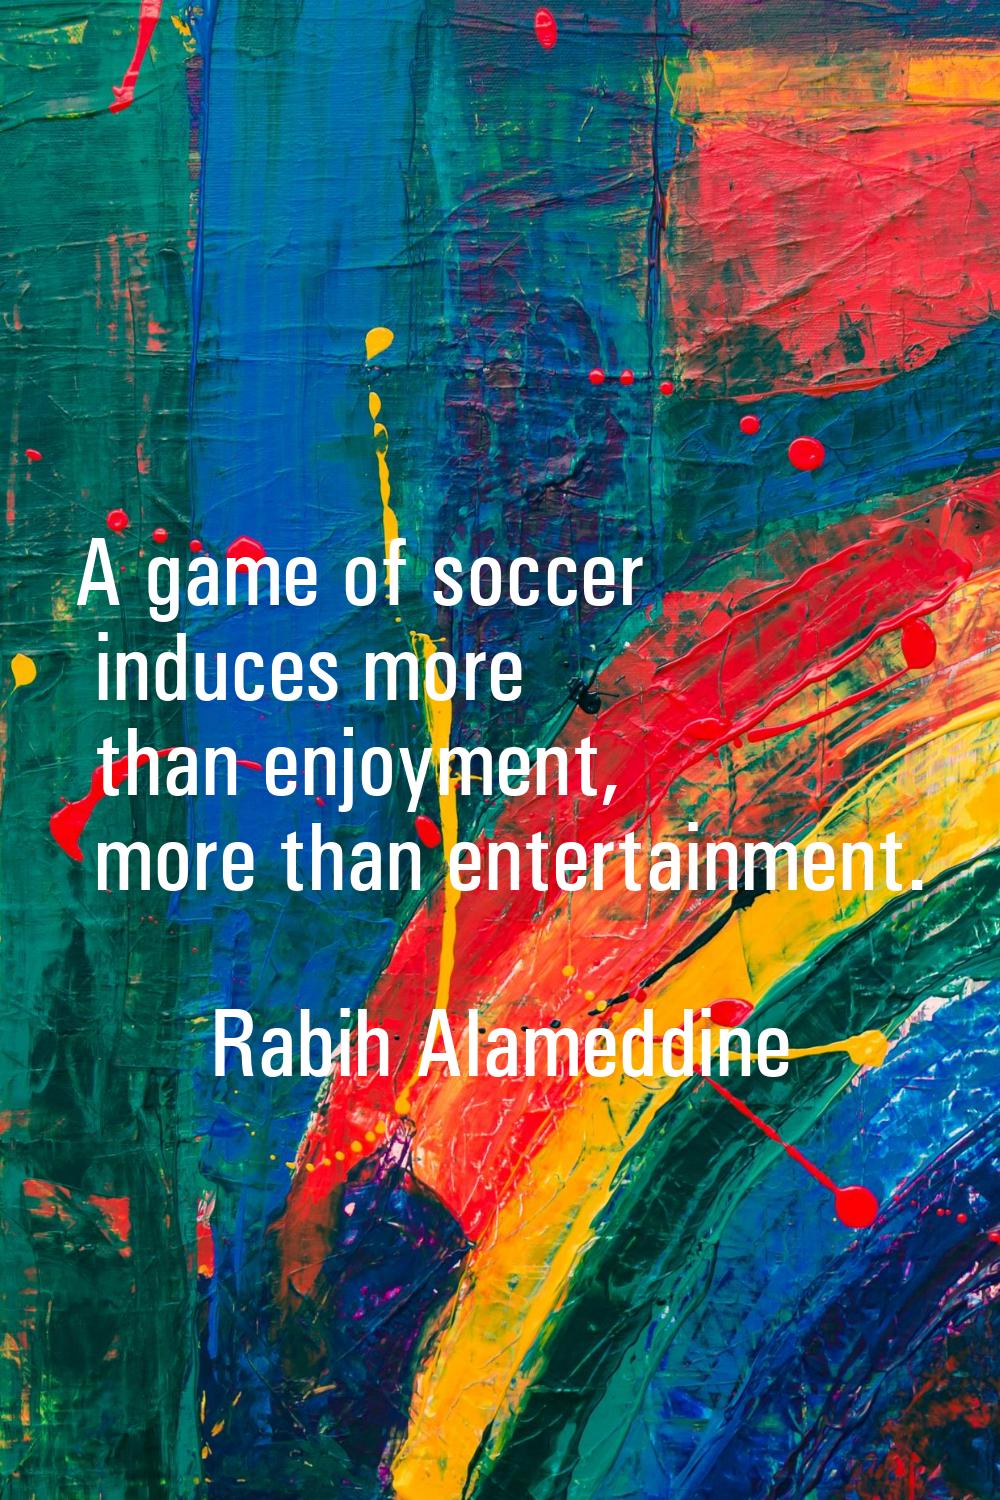 A game of soccer induces more than enjoyment, more than entertainment.